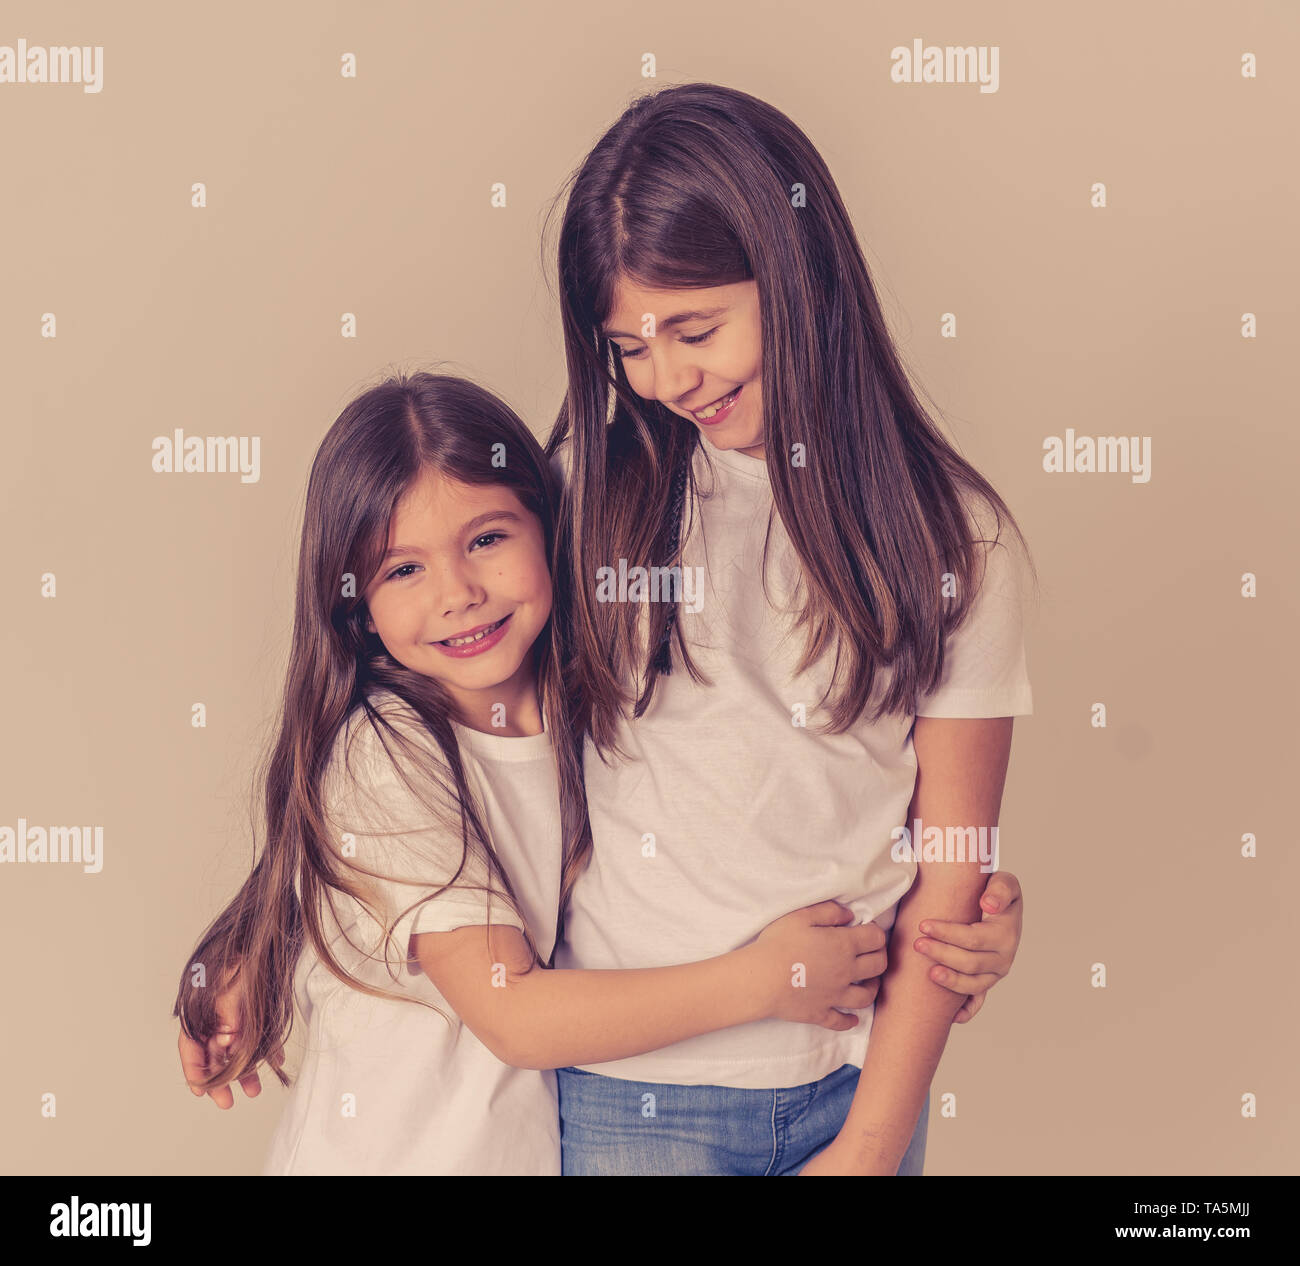 Cute portrait of two cheerful siblings girls sisters having fun together hugging and laughing posing for the camera. Studio shot with copy space. In F Stock Photo